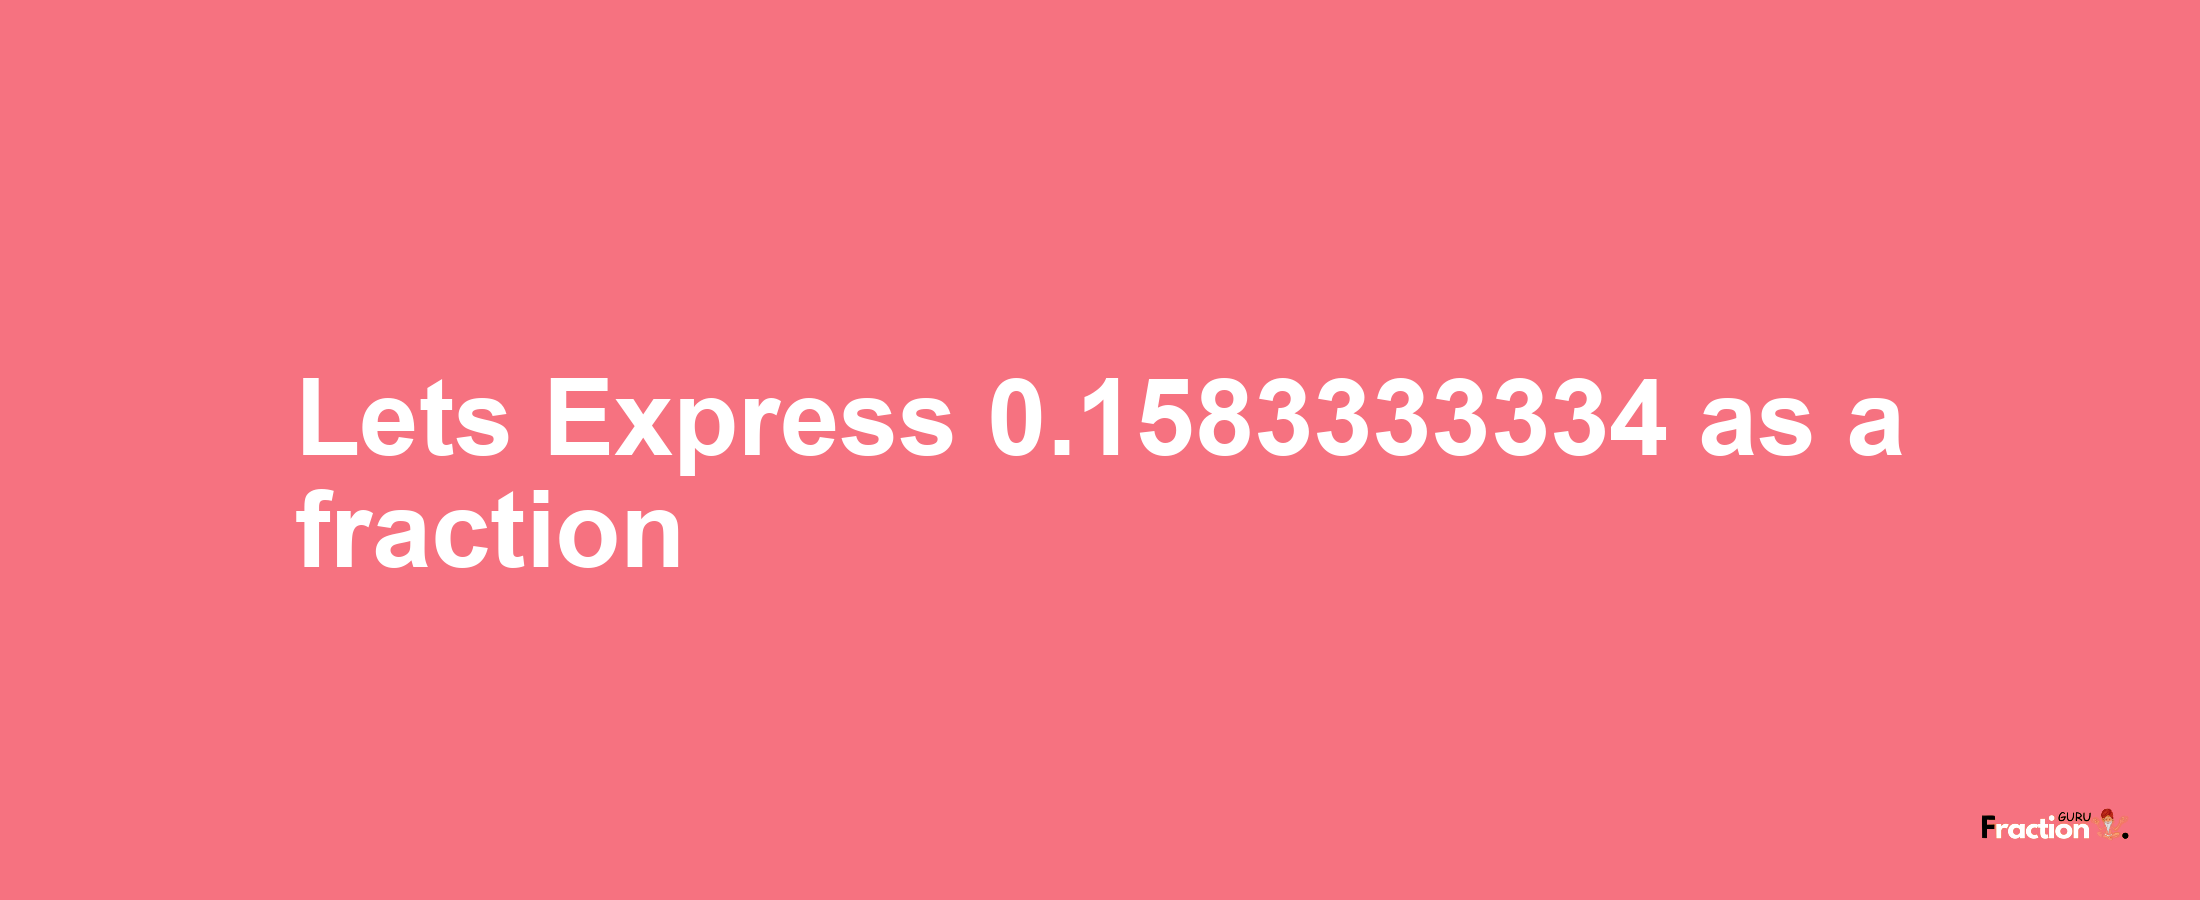 Lets Express 0.1583333334 as afraction